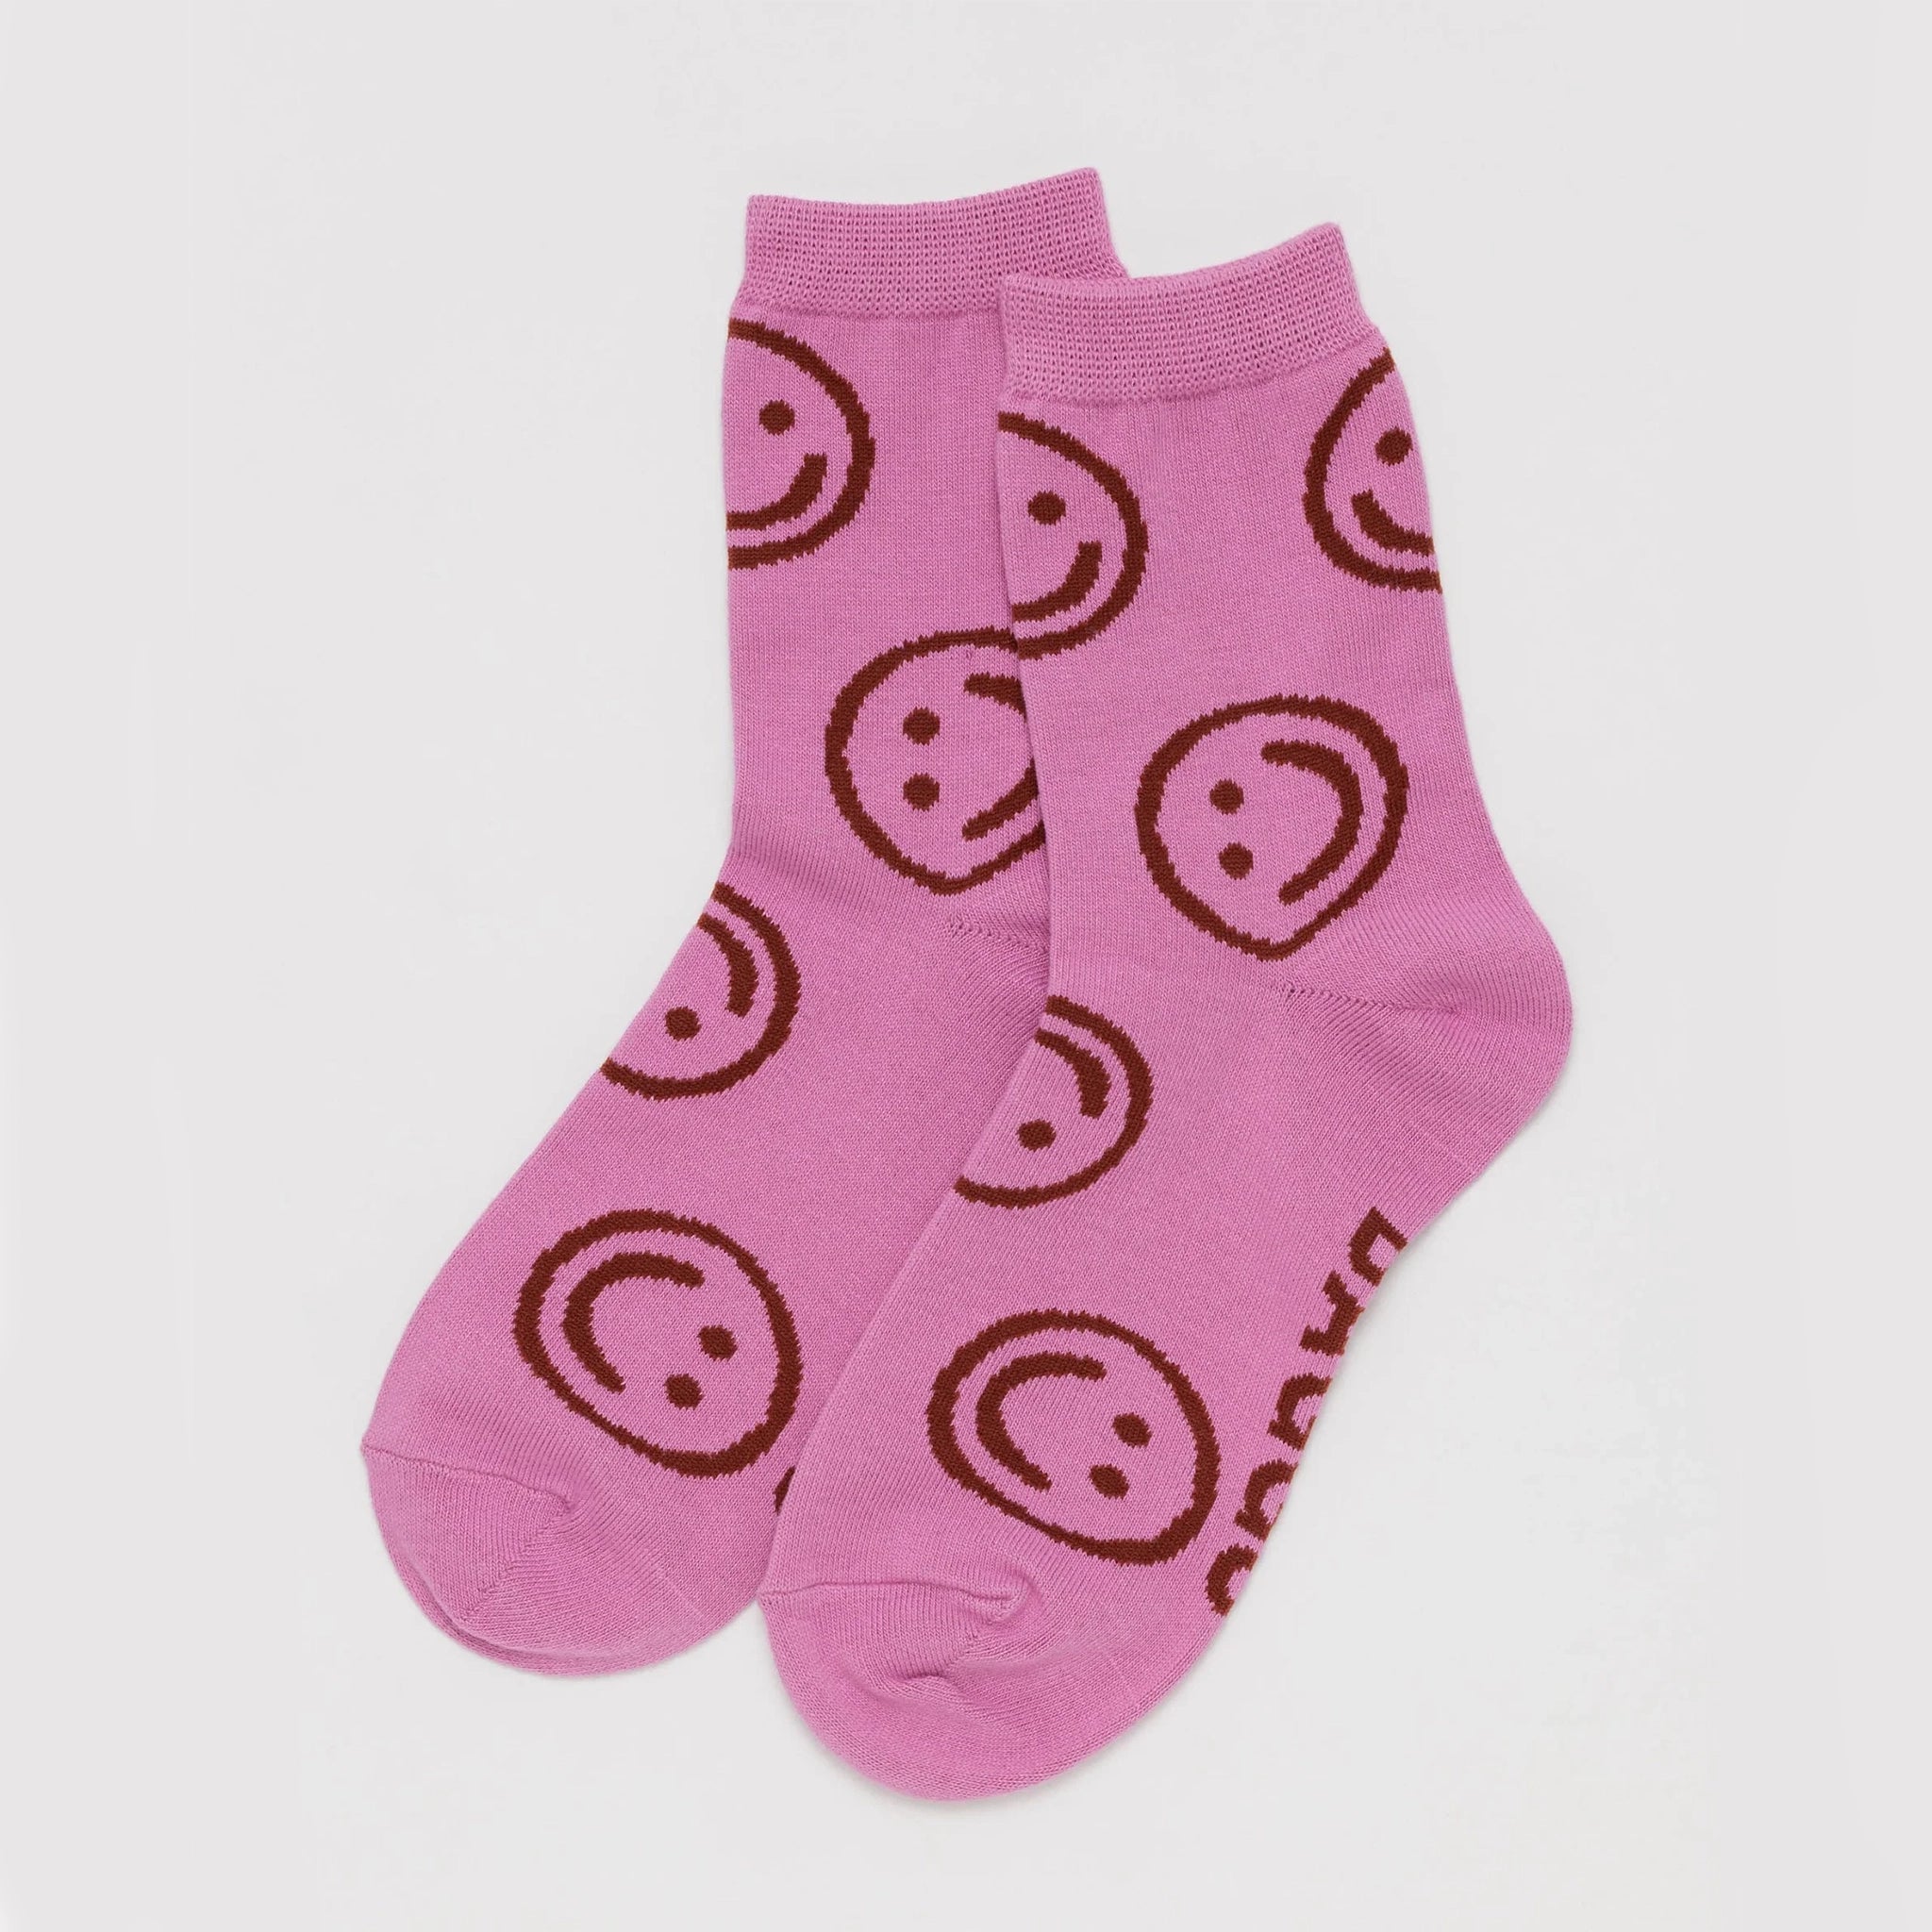 xOn a white background is a pair of hot pink socks with a smiley face print all over.